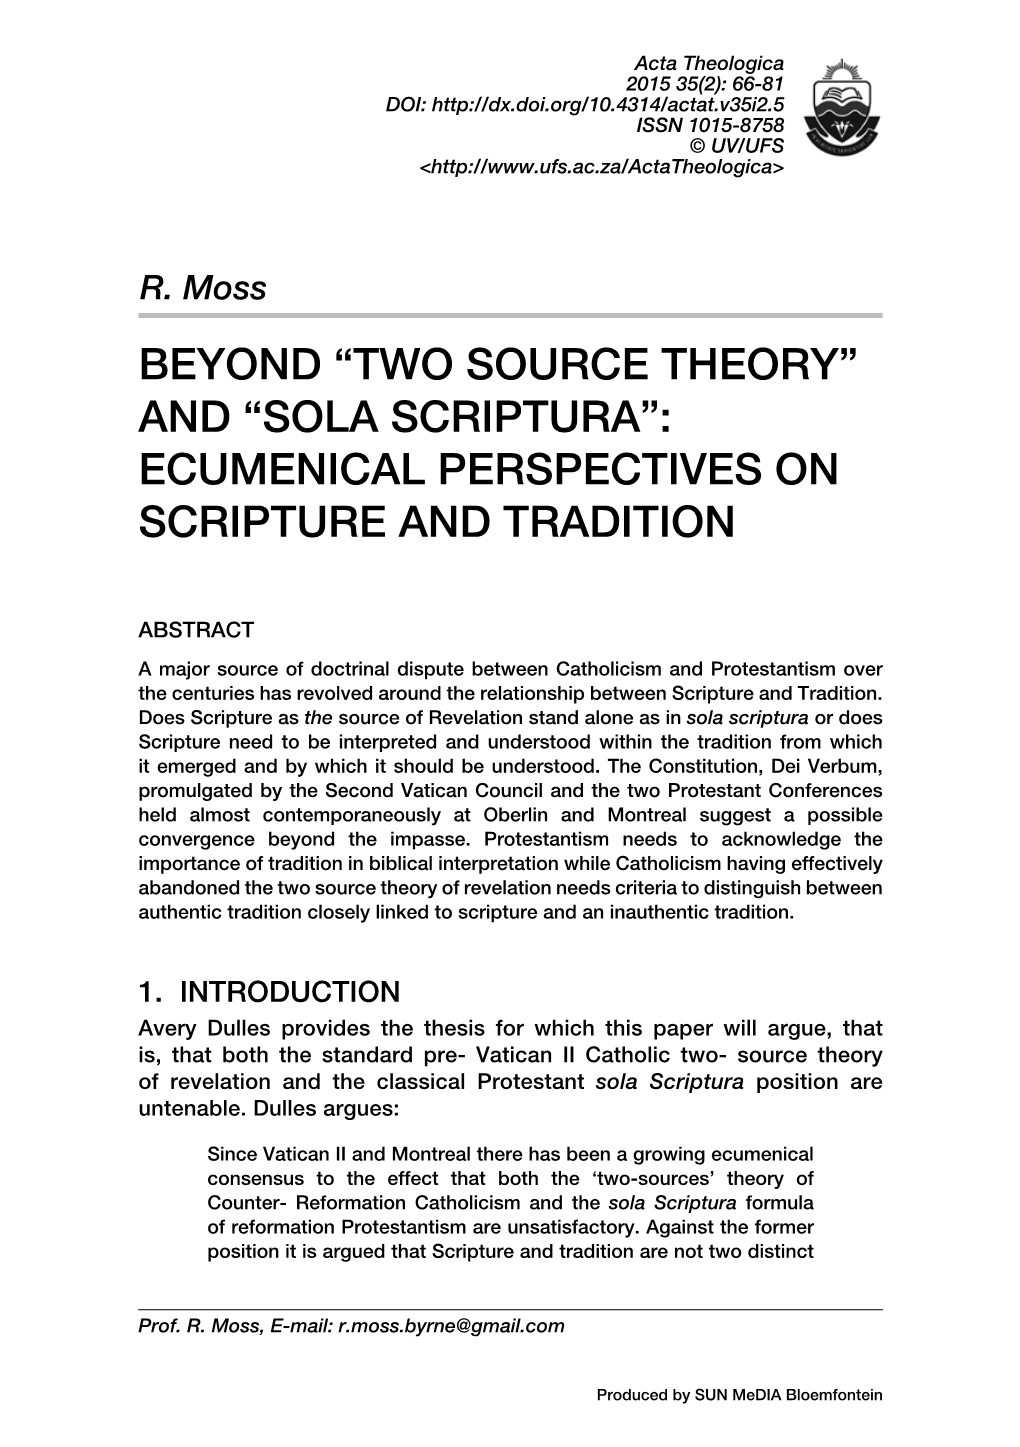 Beyond “Two Source Theory” and “Sola Scriptura”: Ecumenical Perspectives on Scripture and Tradition